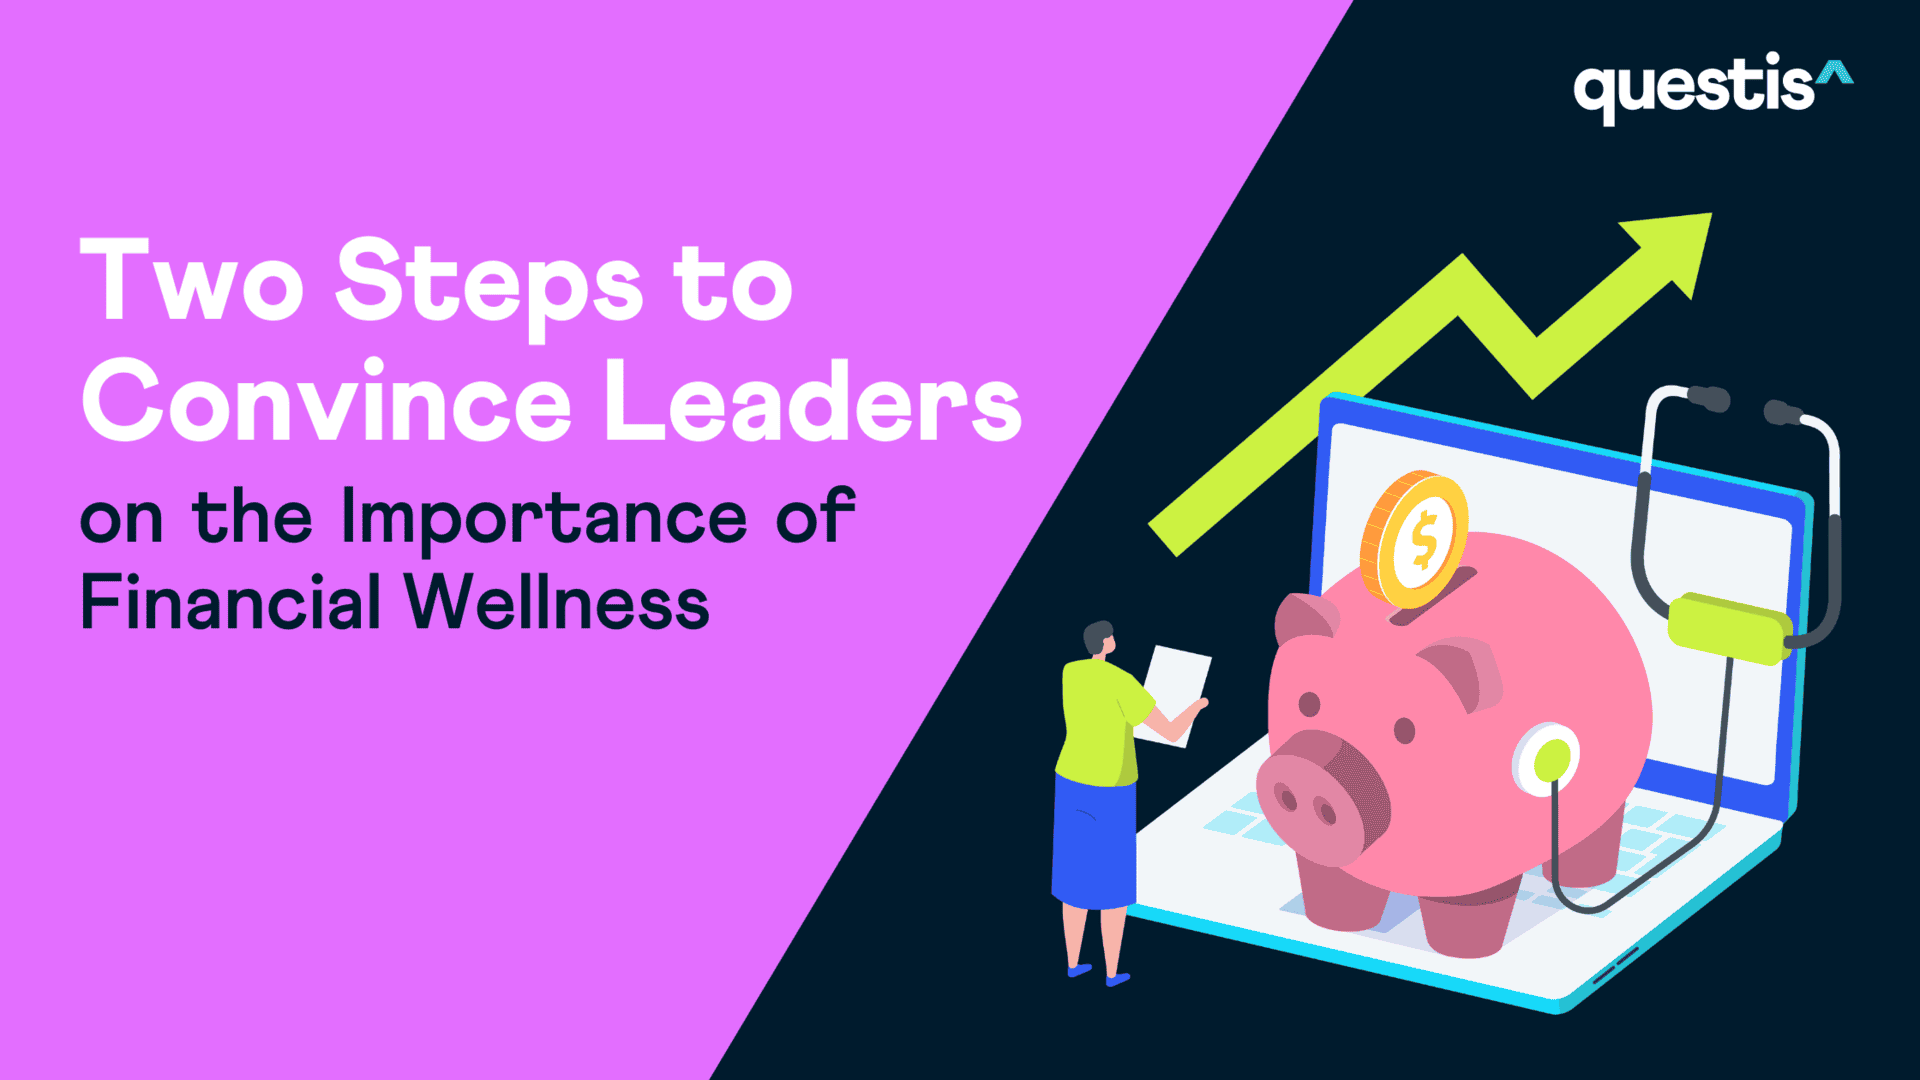 Two Steps to Convince Leaders on the Importance of Financial Wellness